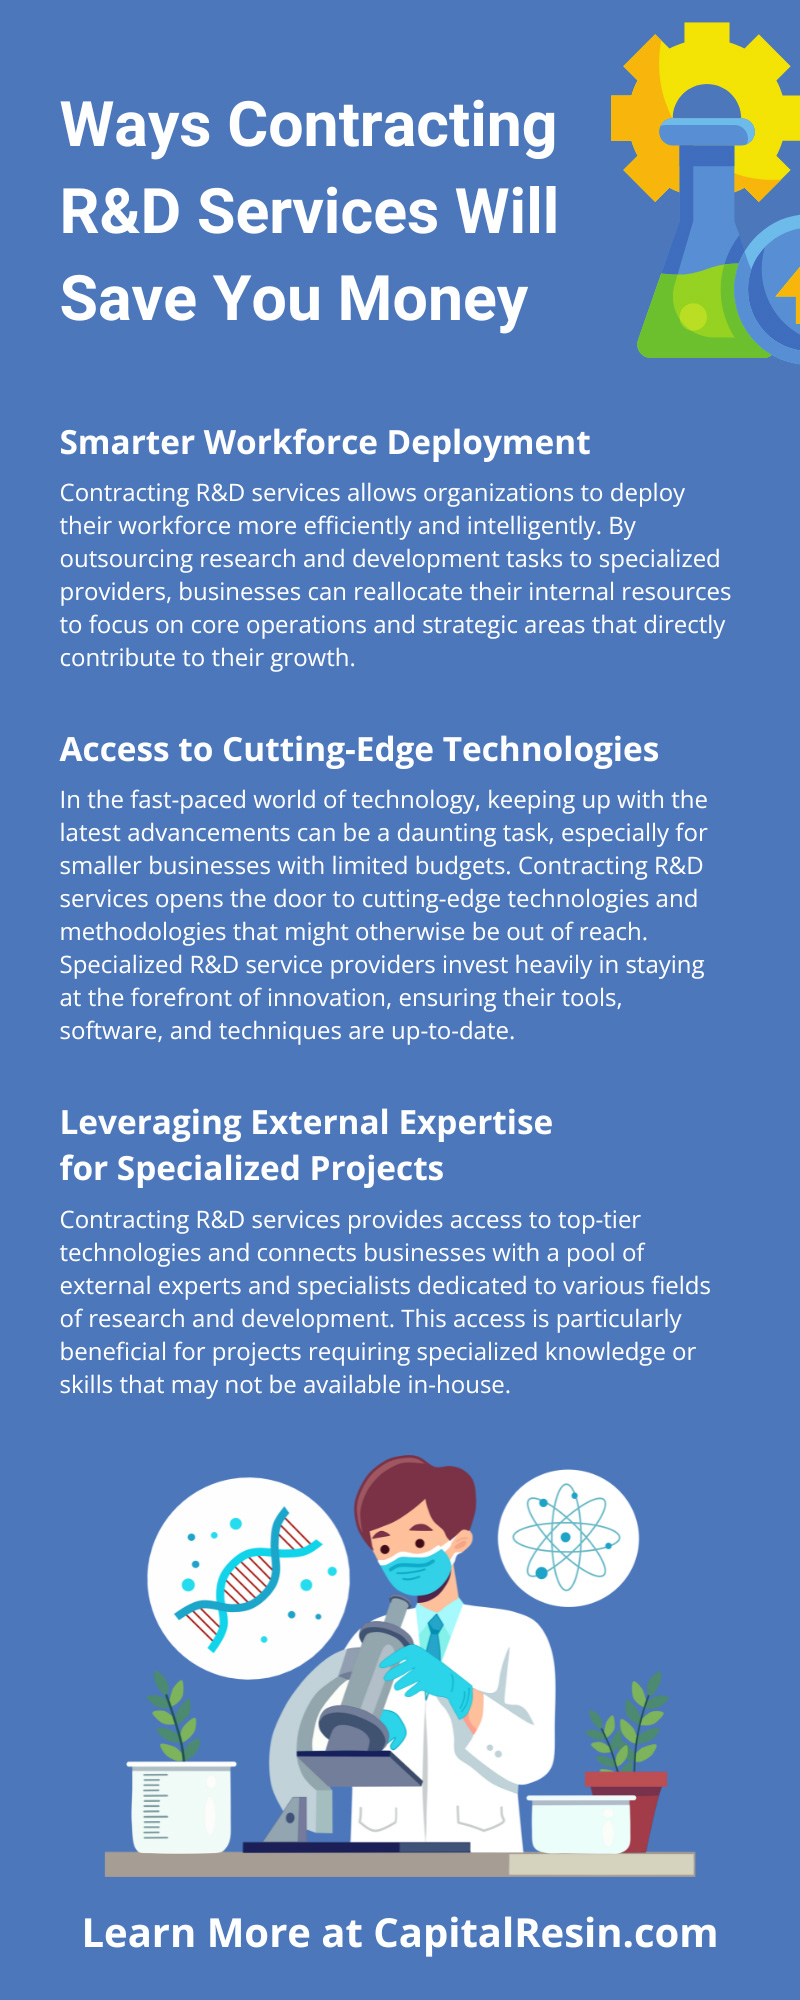 5 Ways Contracting R&D Services Will Save You Money